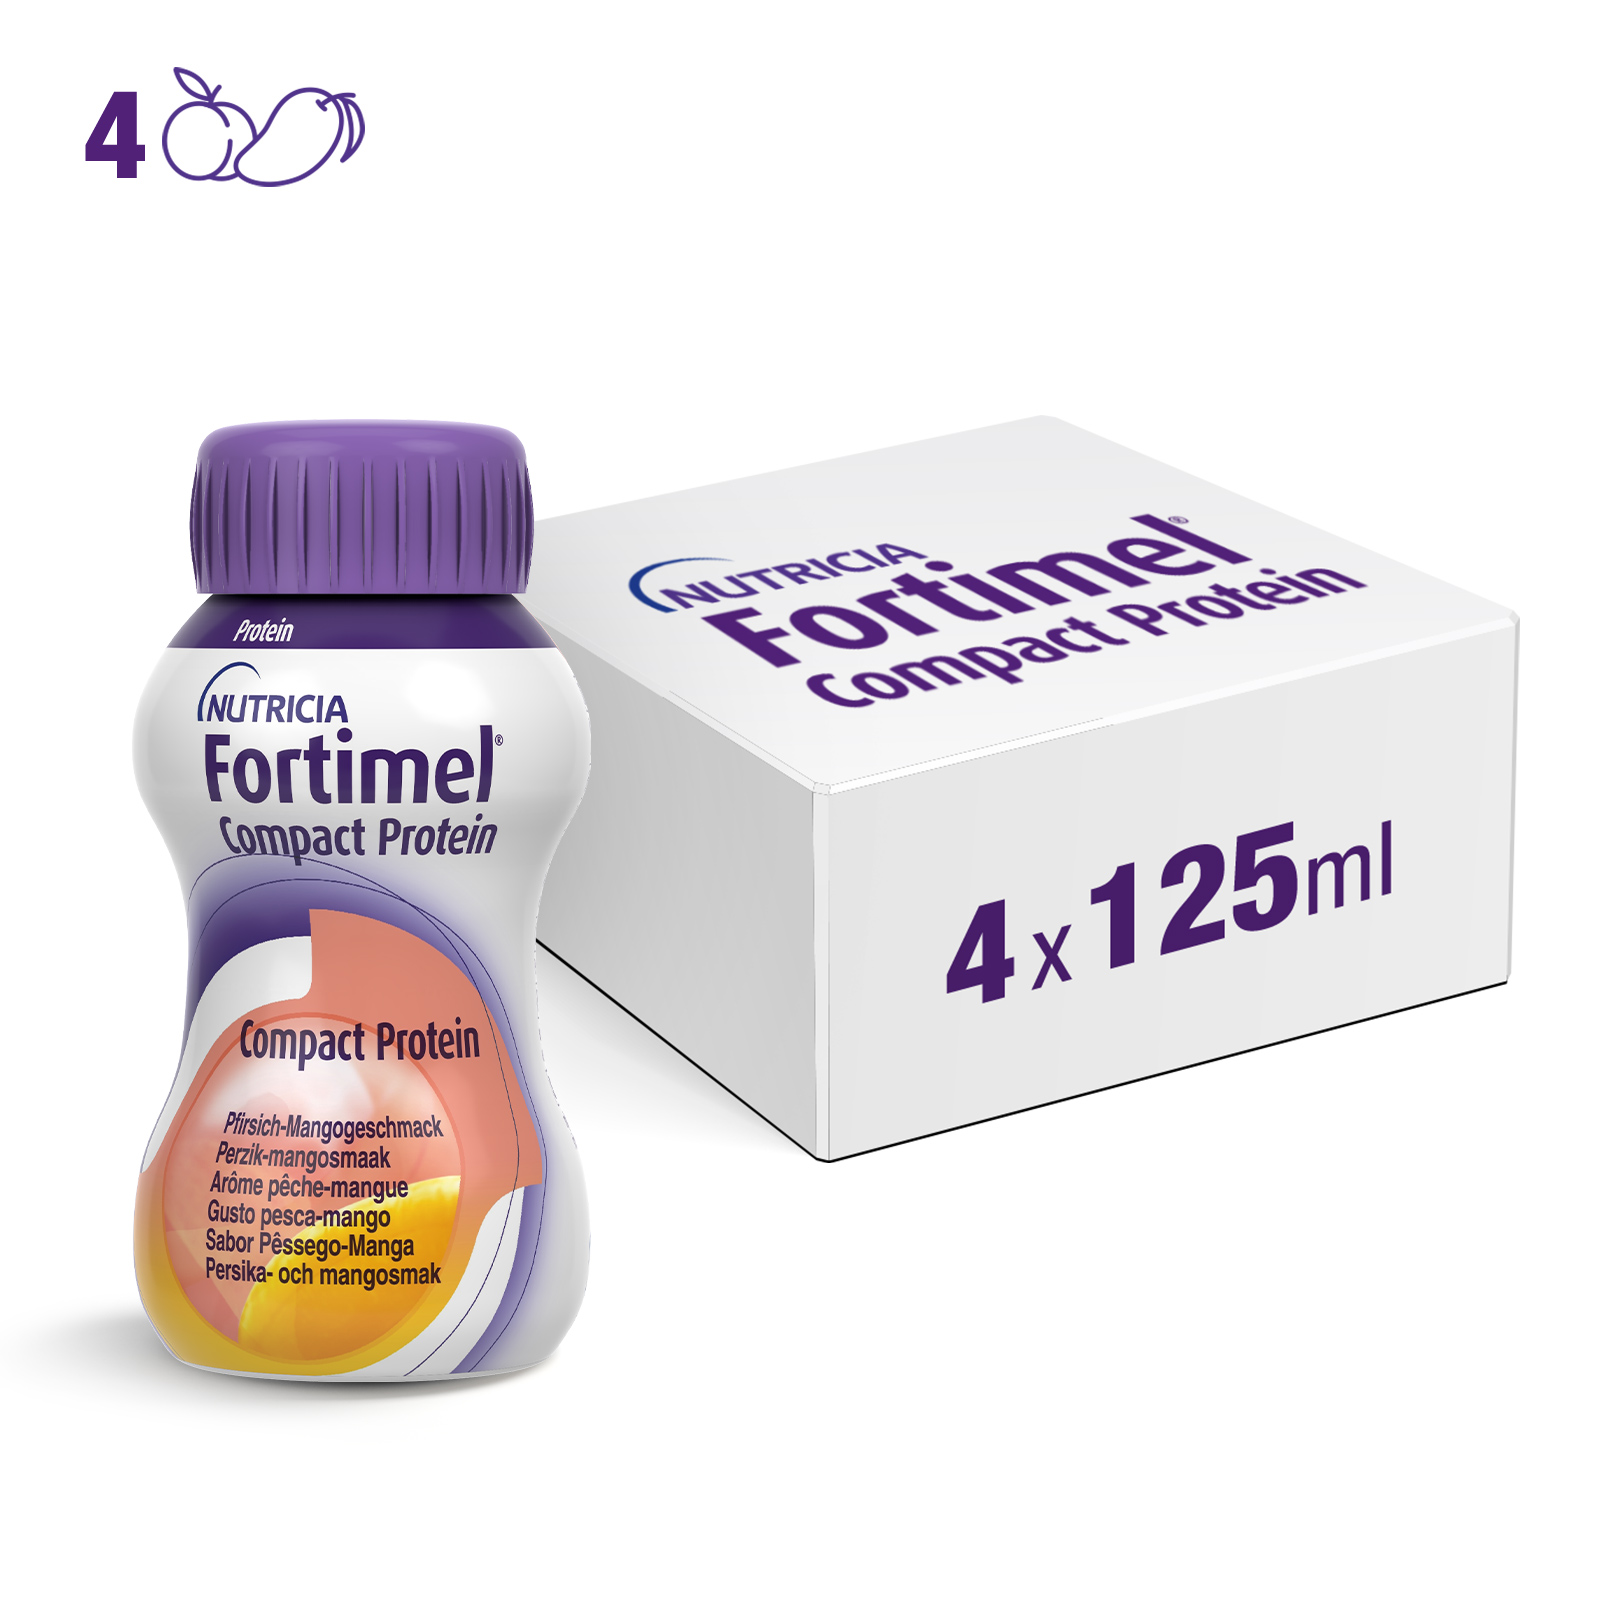 Nutricia Fortimel Protein pêche mangue 4 x 200ml